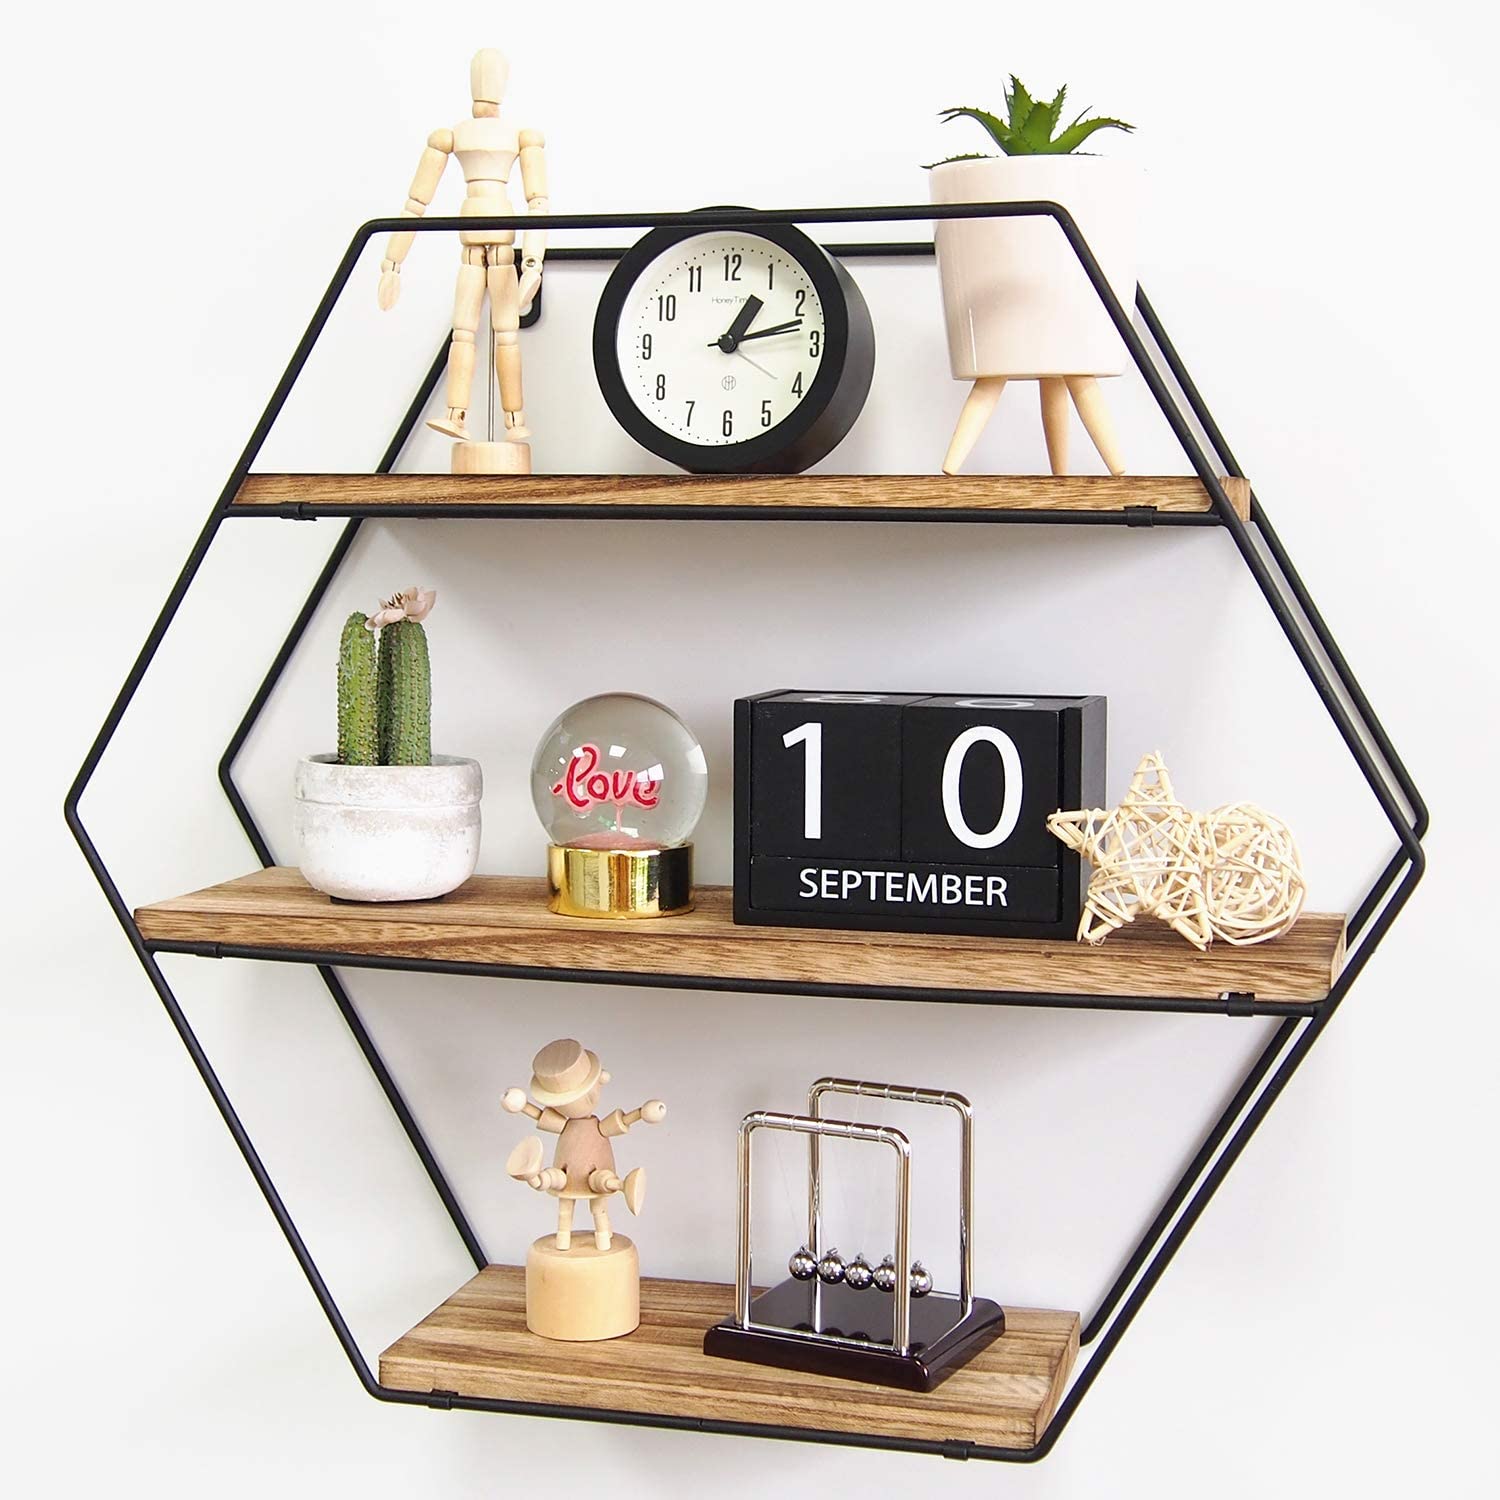 Hexagon stainless steel wall mount installation home decoration floating shelf living room wall